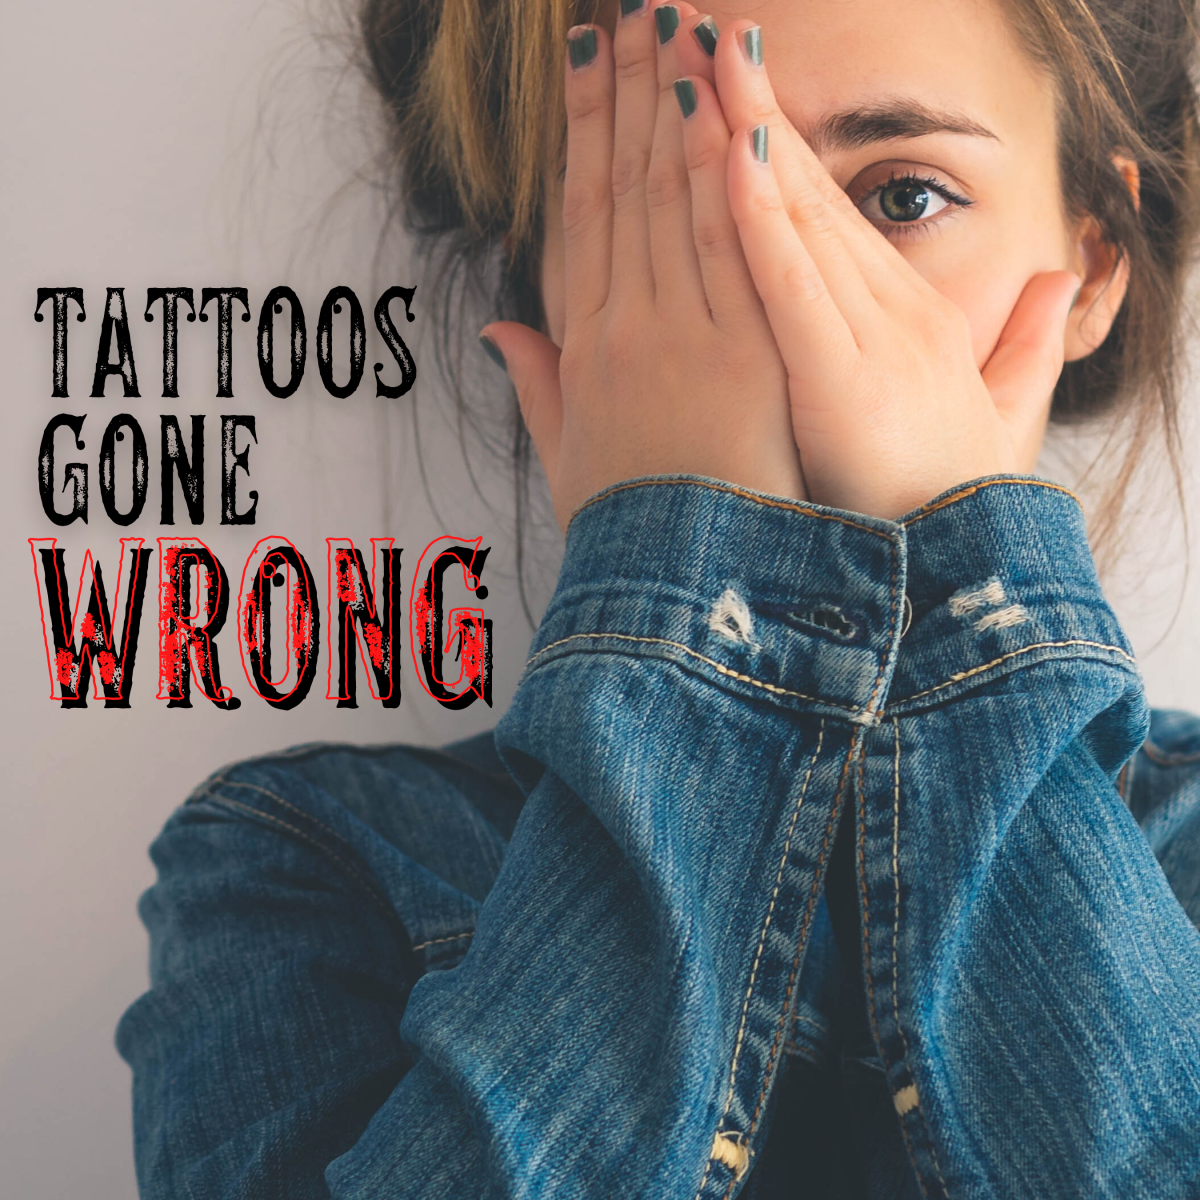 Tattoos Gone Wrong (and What to Do With a Bad Tattoo)